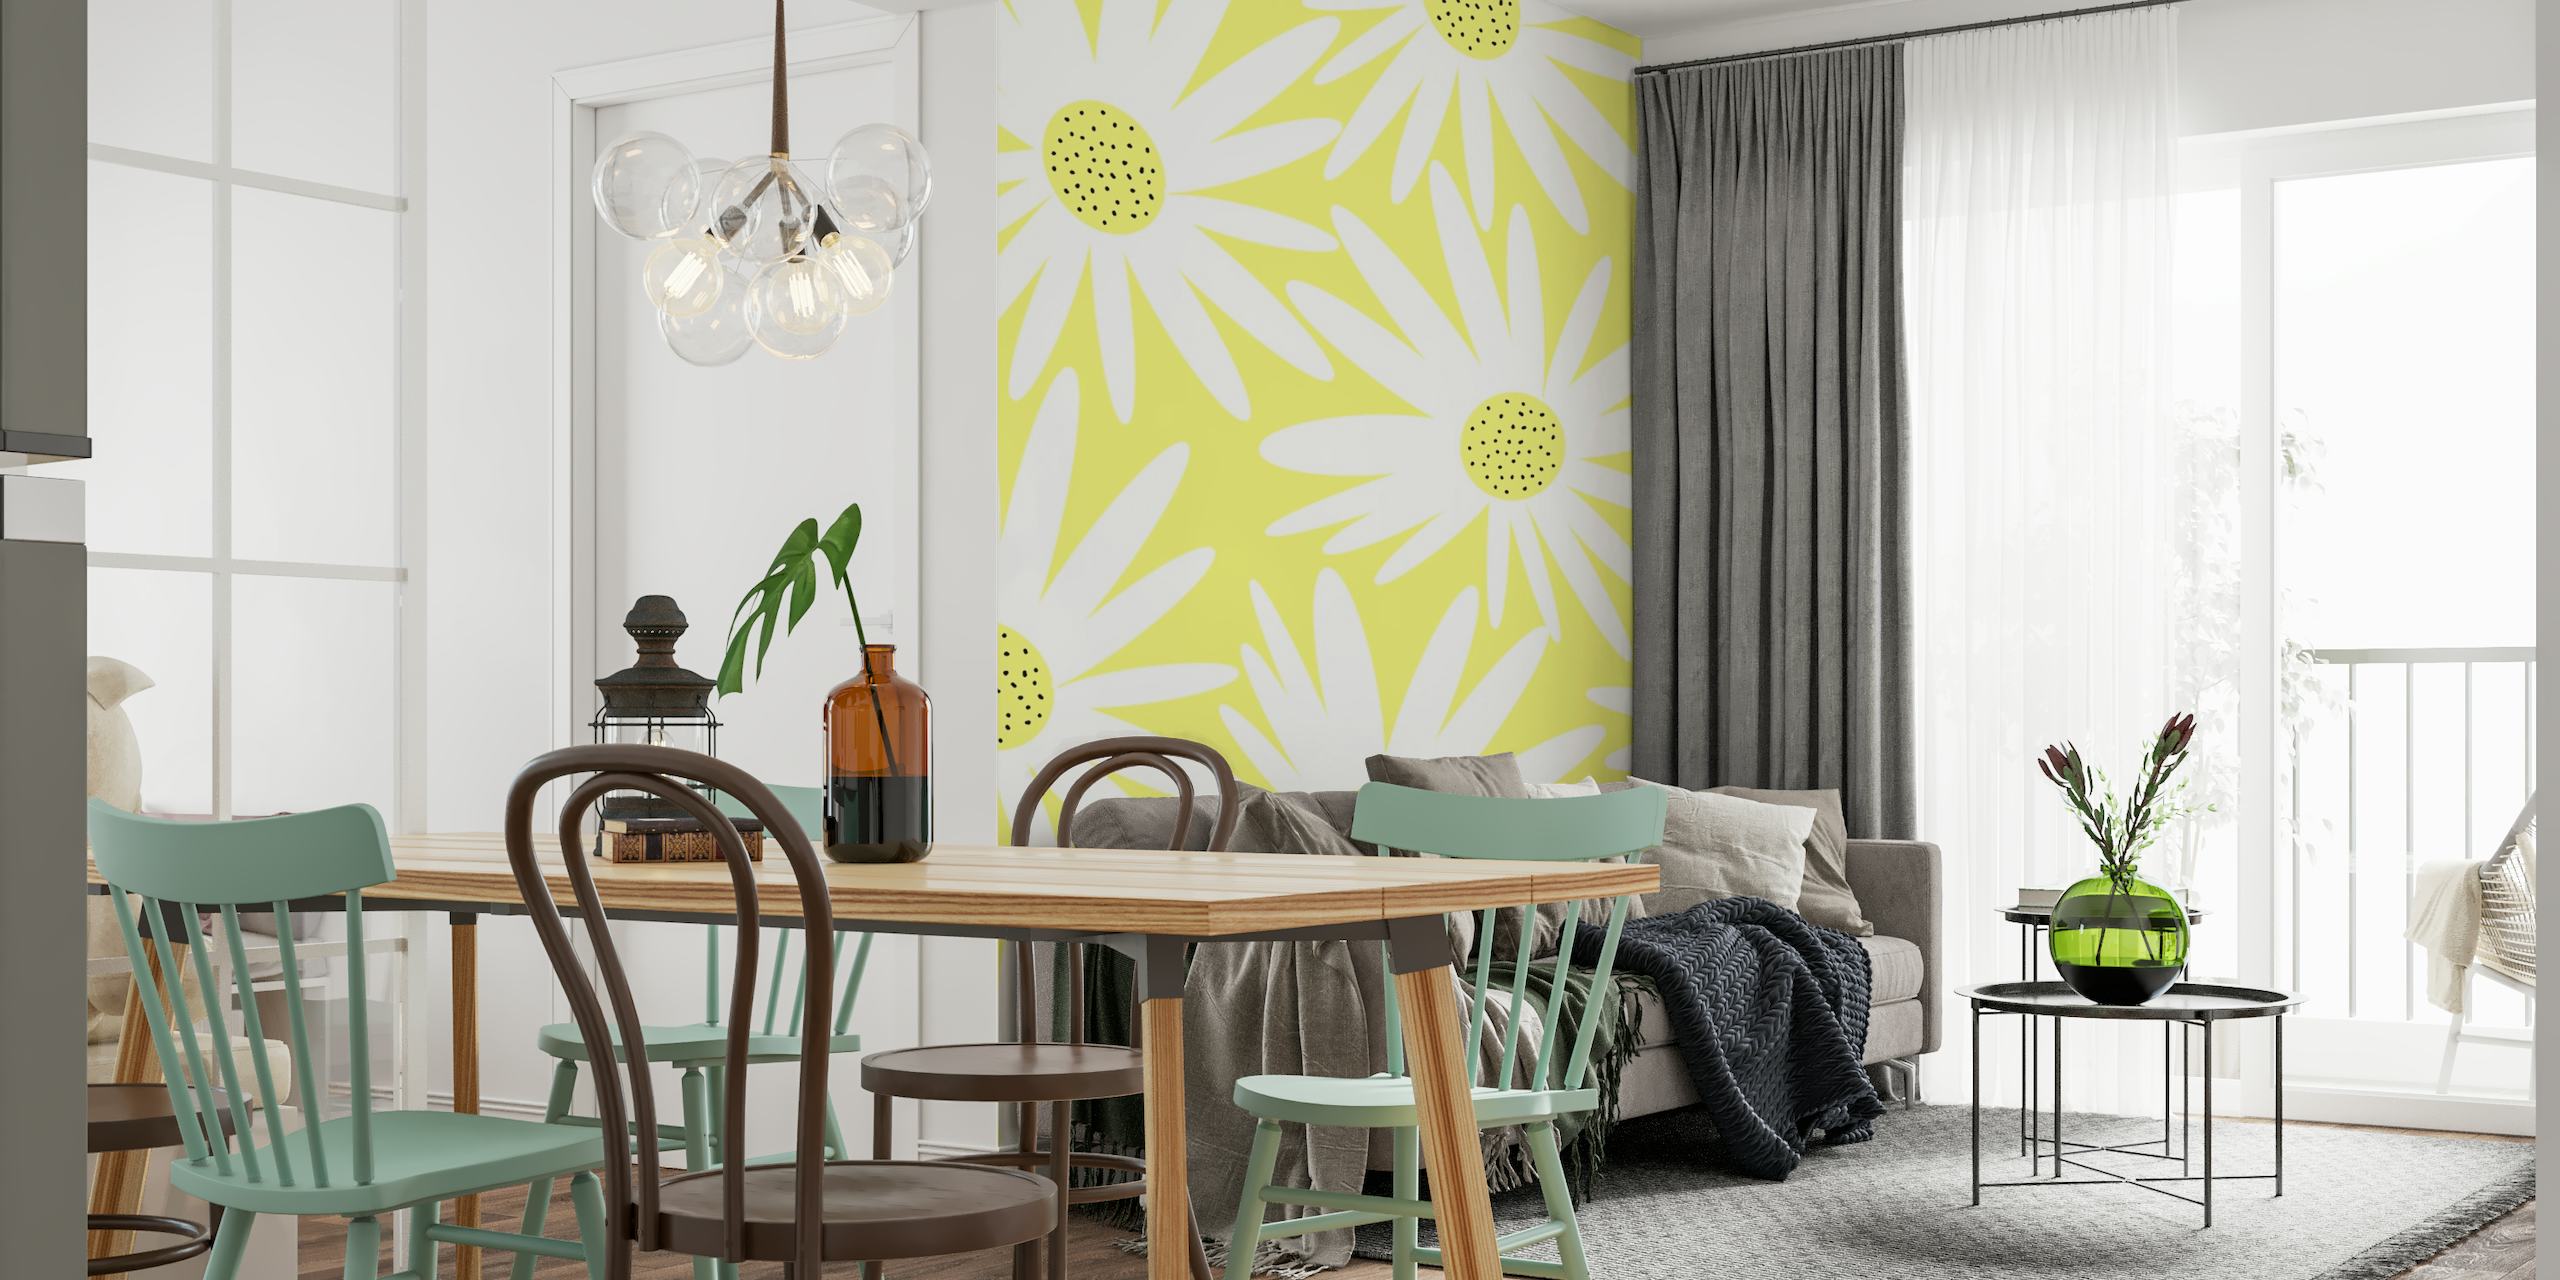 Retro sunflower pattern wall mural on a bright yellow background